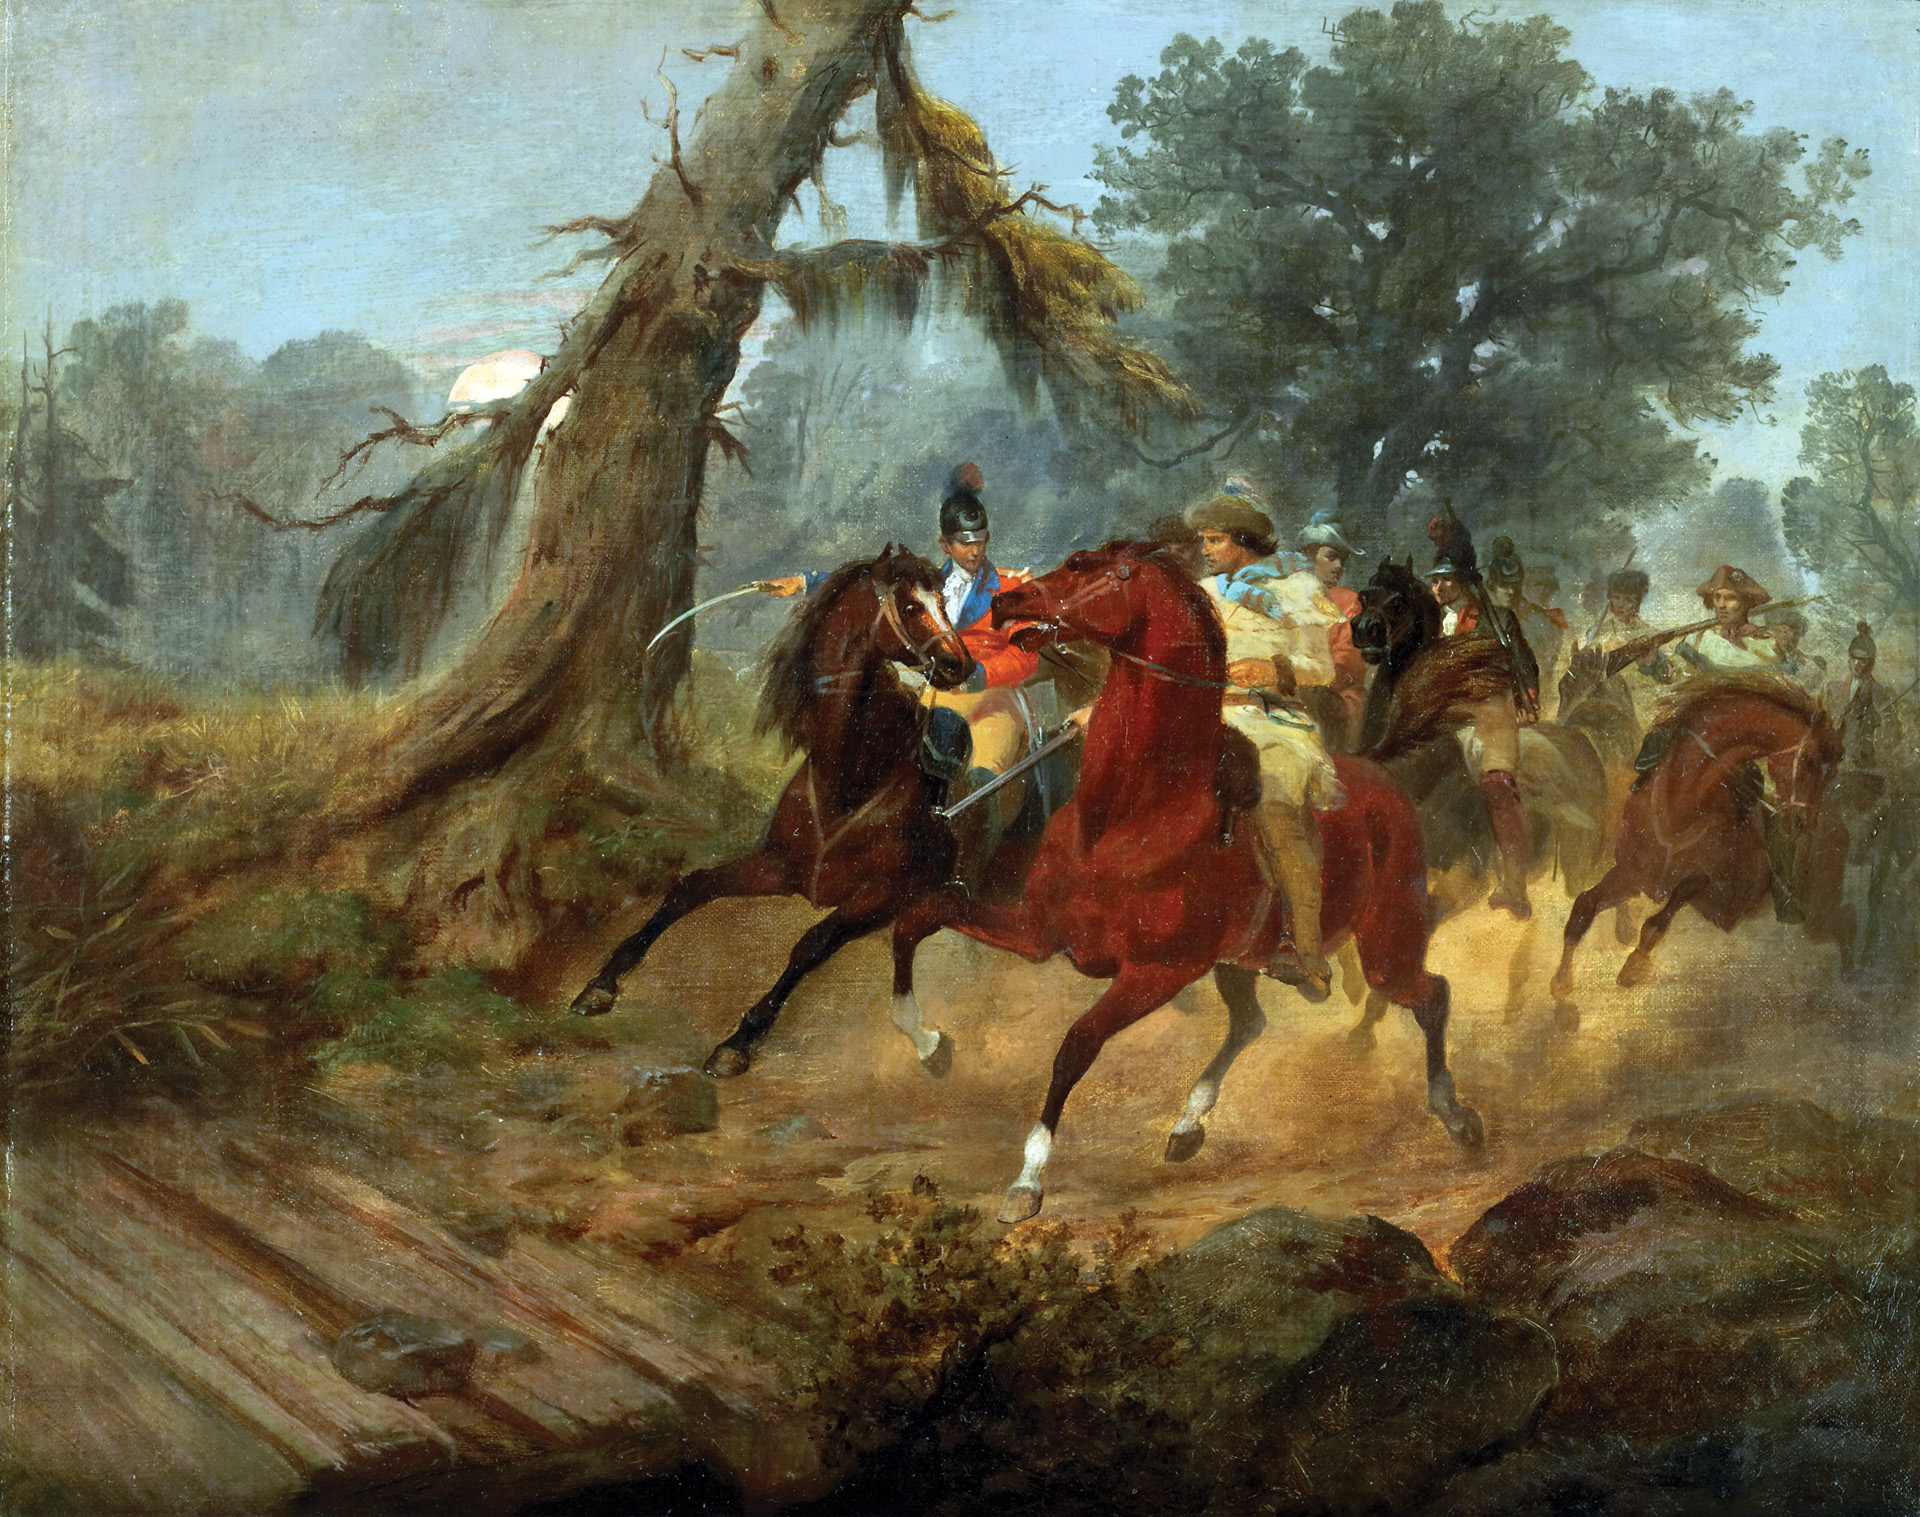 Francis “Swamp Fox” Marion leads his mounted militia on a back-country operation.